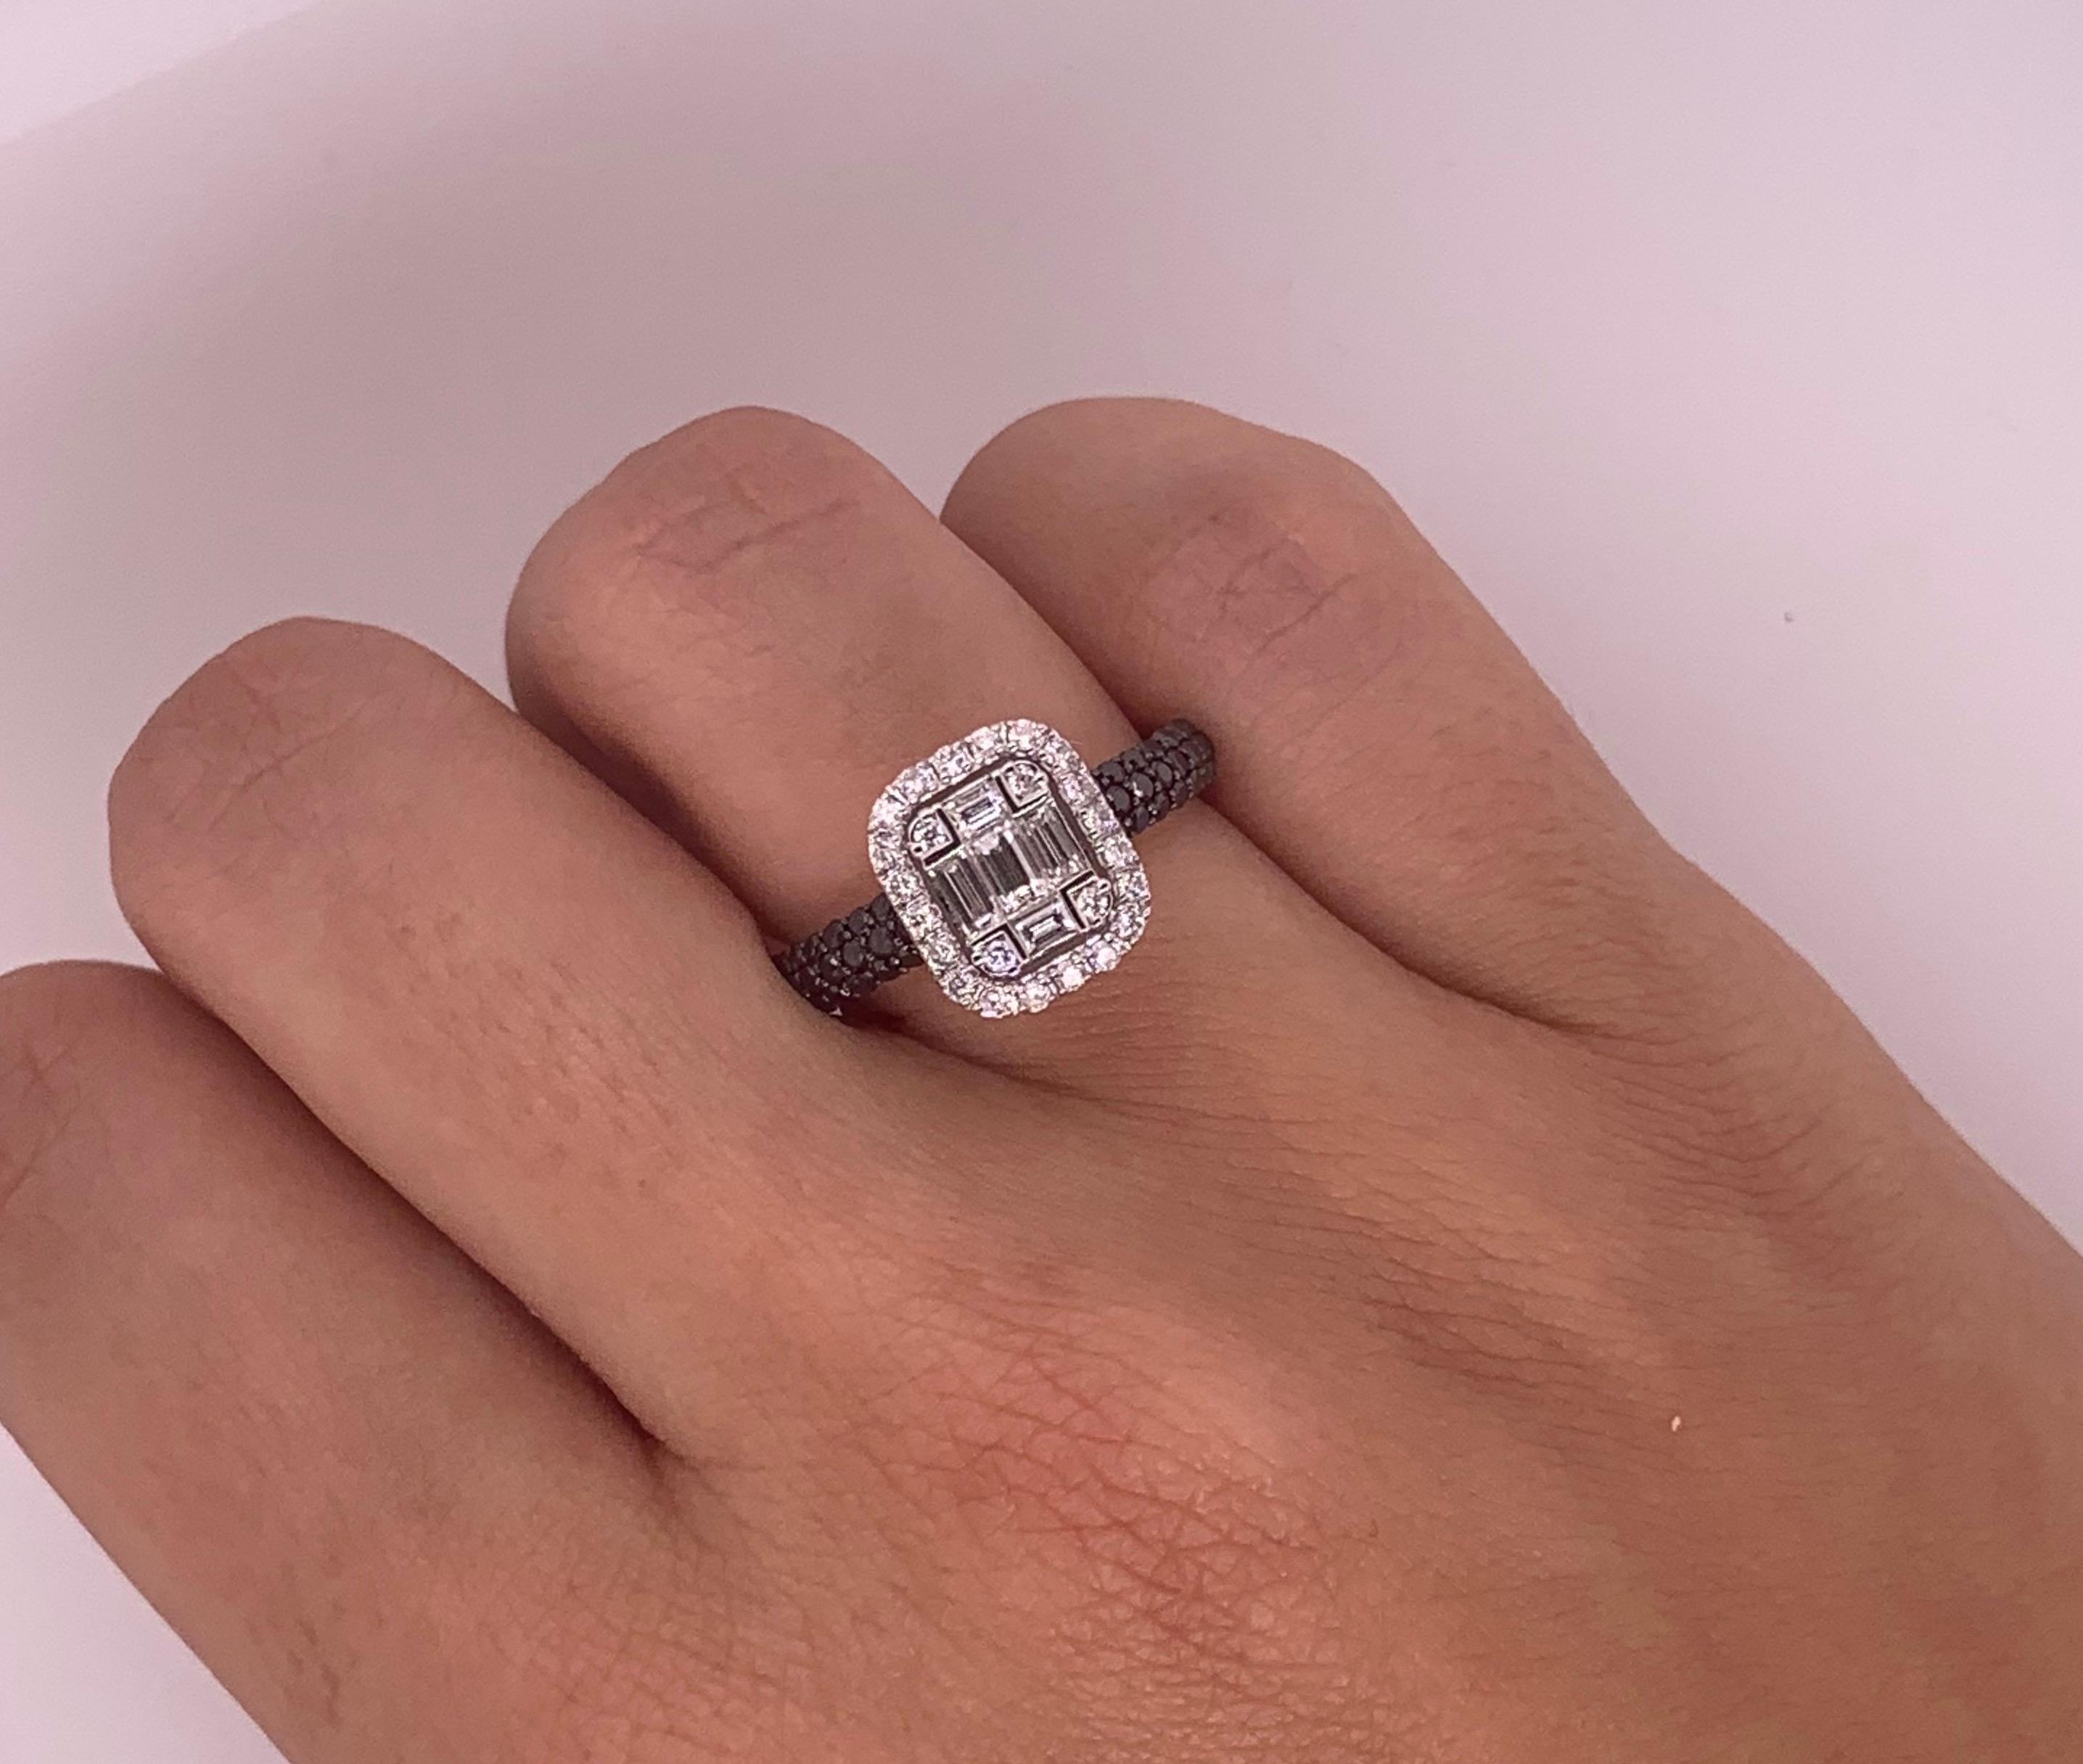 Material: 18k White Gold 
Stone Details: 50 Round Black Diamond at 0.47 Carats
Diamond Details: 24 Round White Diamonds at 0.21 Carats
Diamond Details: 5 Baguette Diamonds at 0.31 Carats
The face of this ring measures 9.5 x 11 millimeters.

Alberto